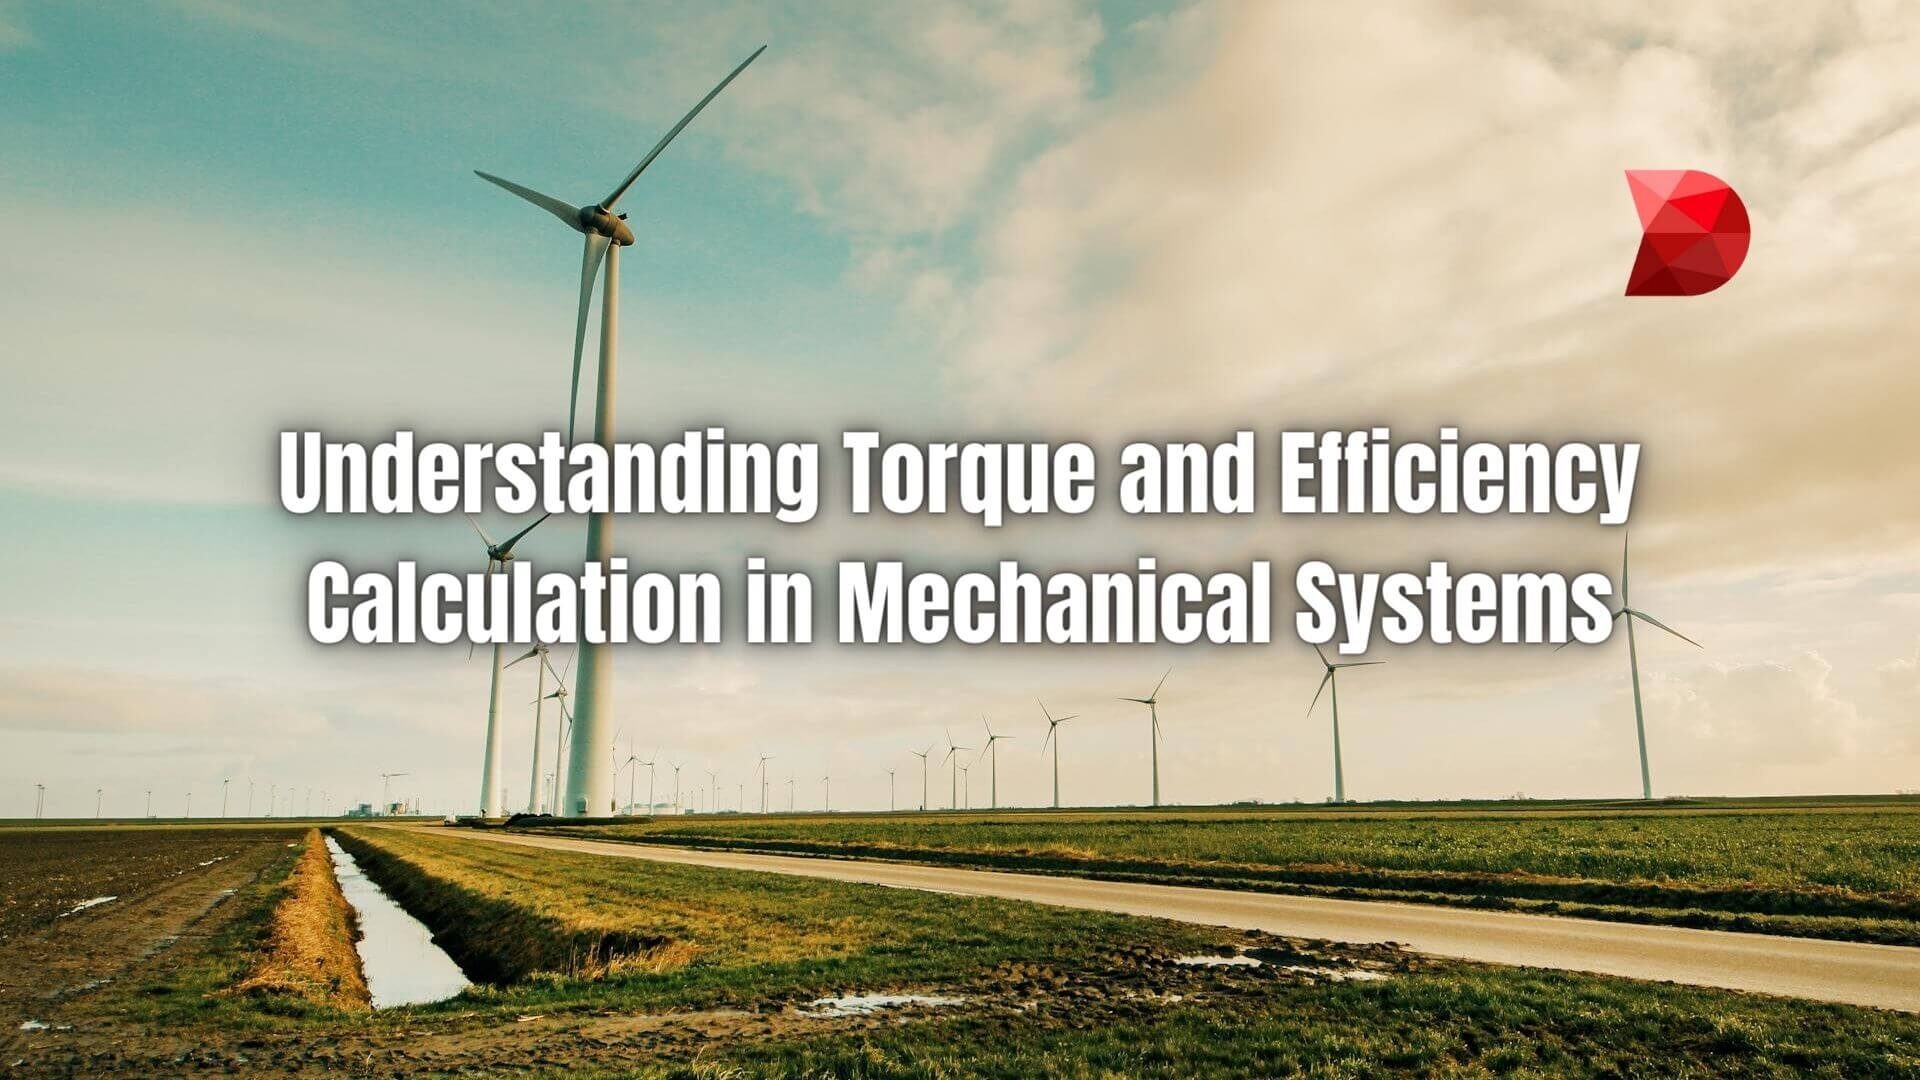 Explore torque basics and efficiency calculation in mechanical systems. Click here to master the essentials with this comprehensive guide!